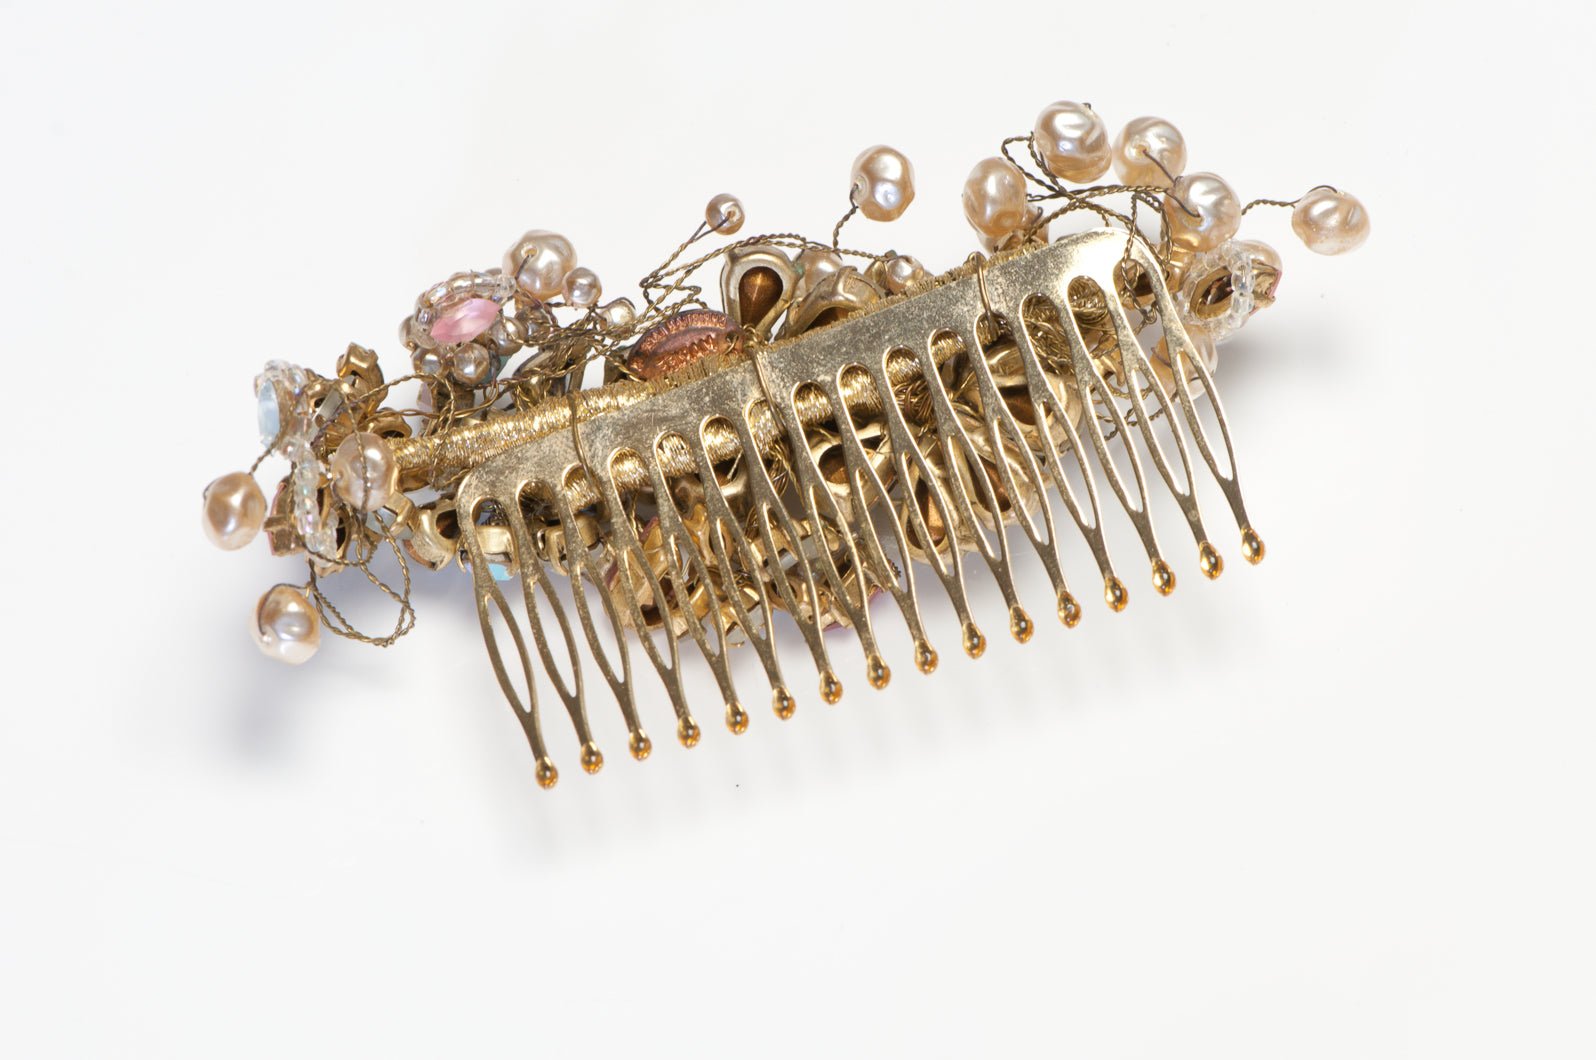 Vintage Christian Mariee Lacroix Couture Pearl Pink Crystal Flower Hair Comb